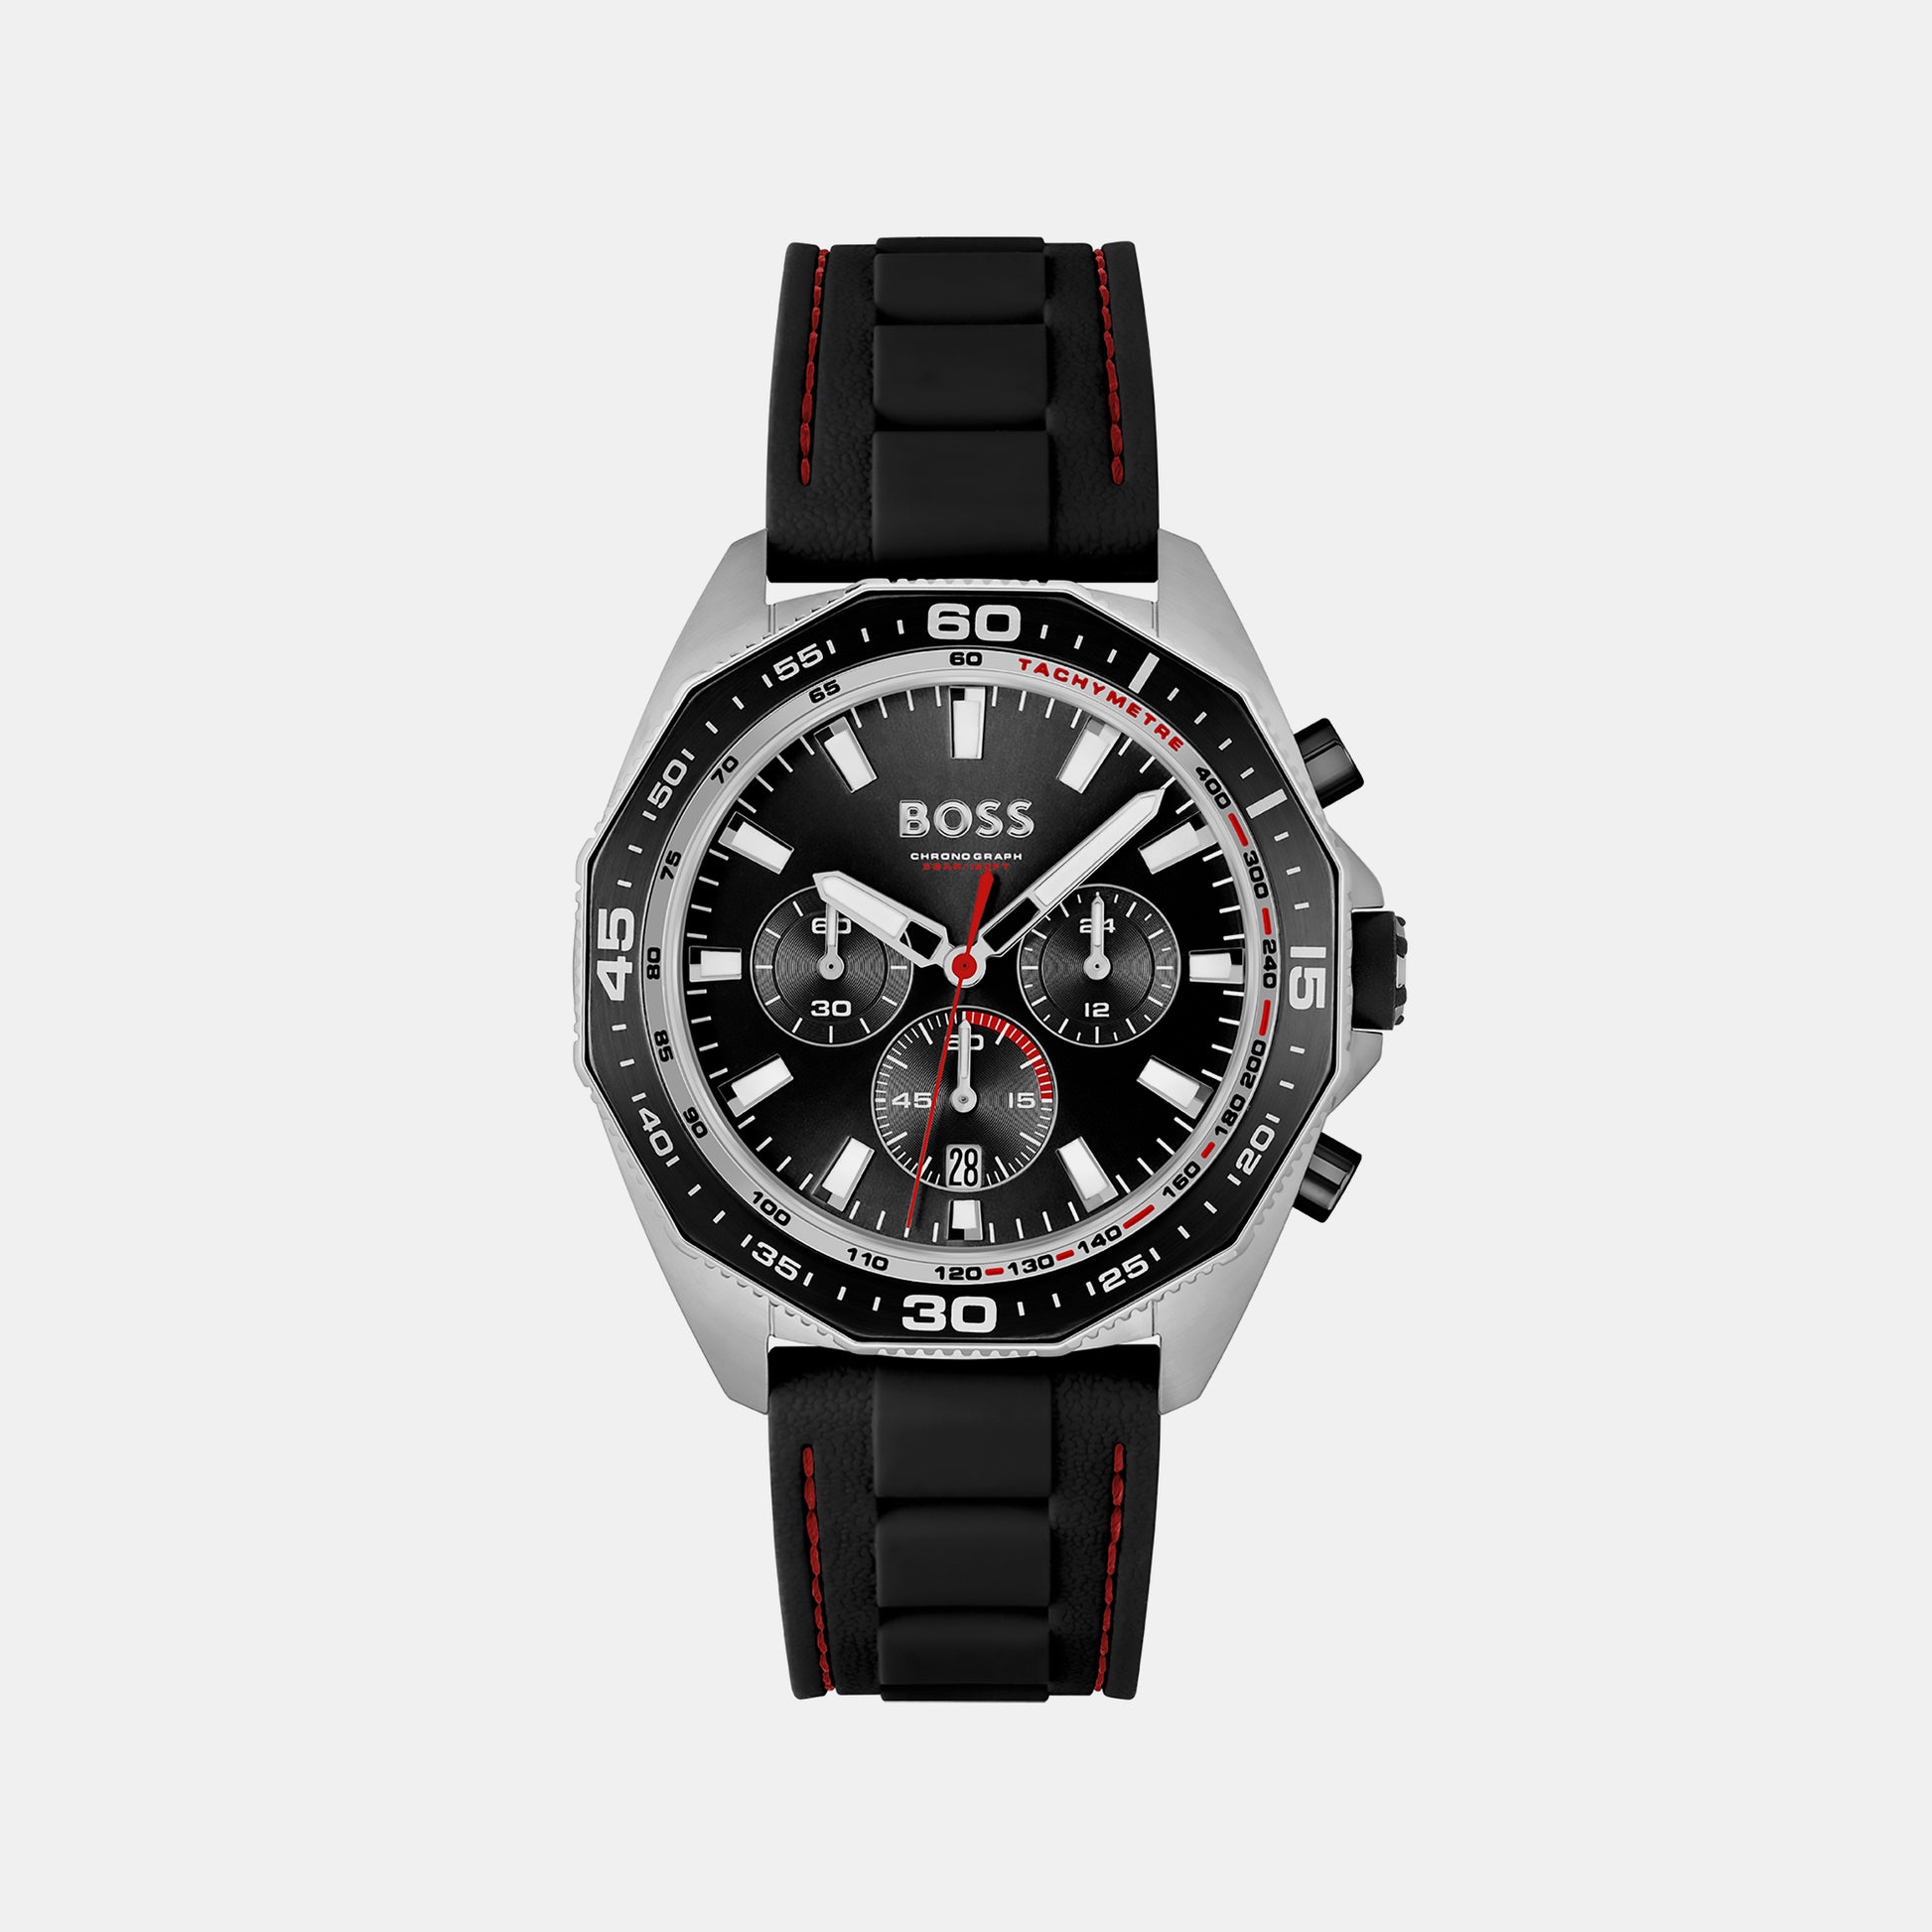 Male Black Chronograph Stainless Steel Watch 1513969 – Just In Time | Quarzuhren